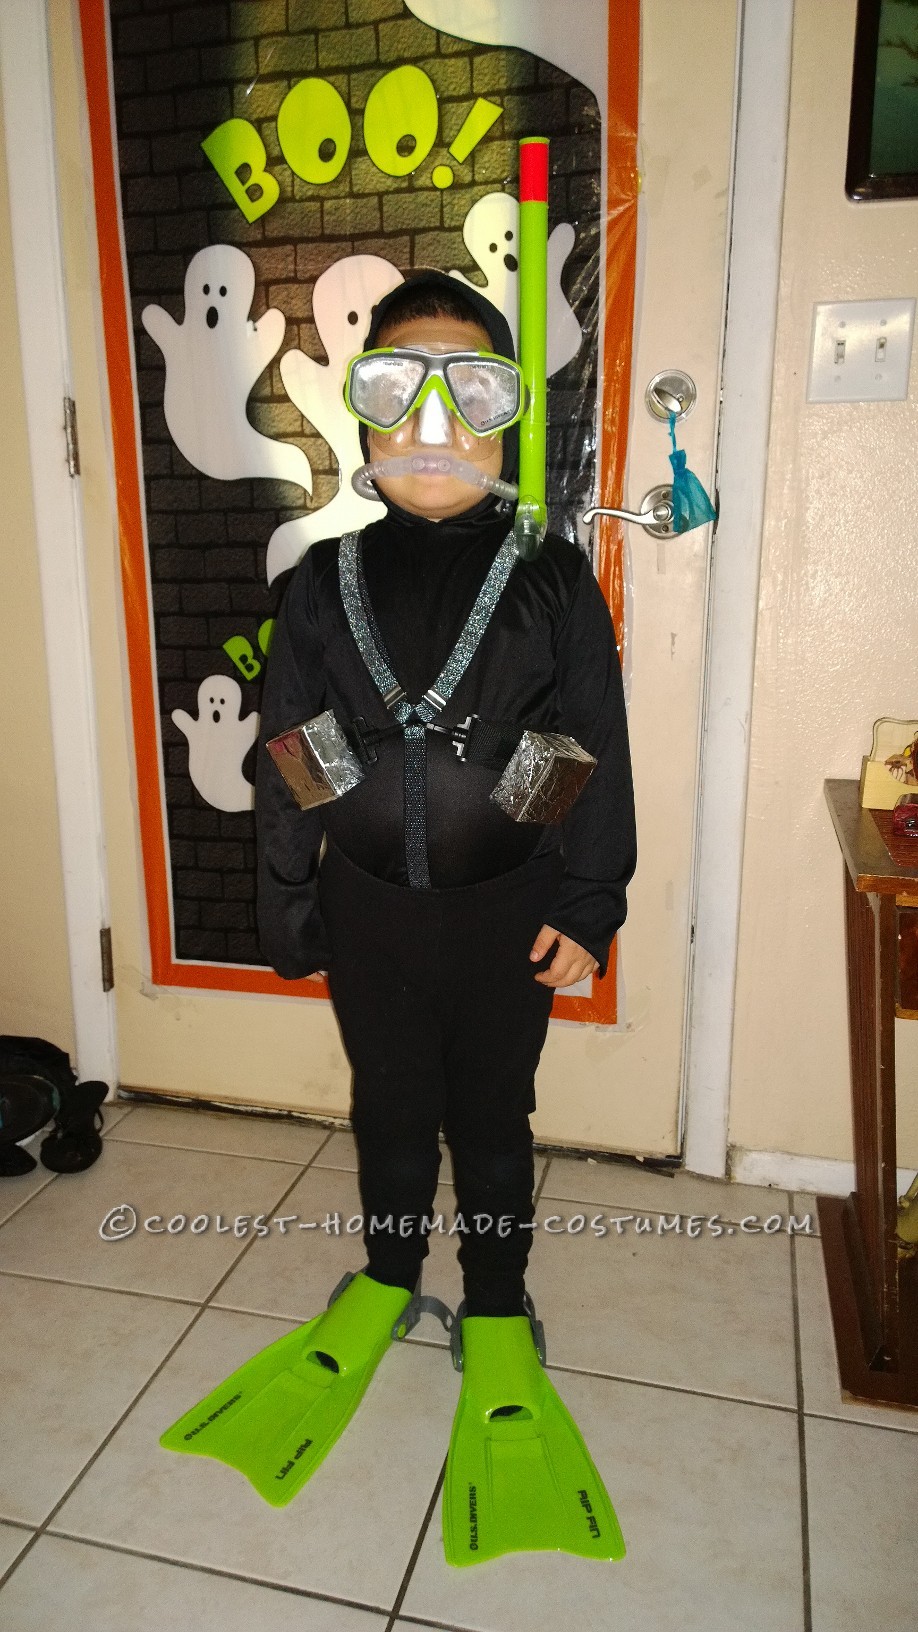 Best Mom-Made Scuba Diver Costume for a 5 Year Old